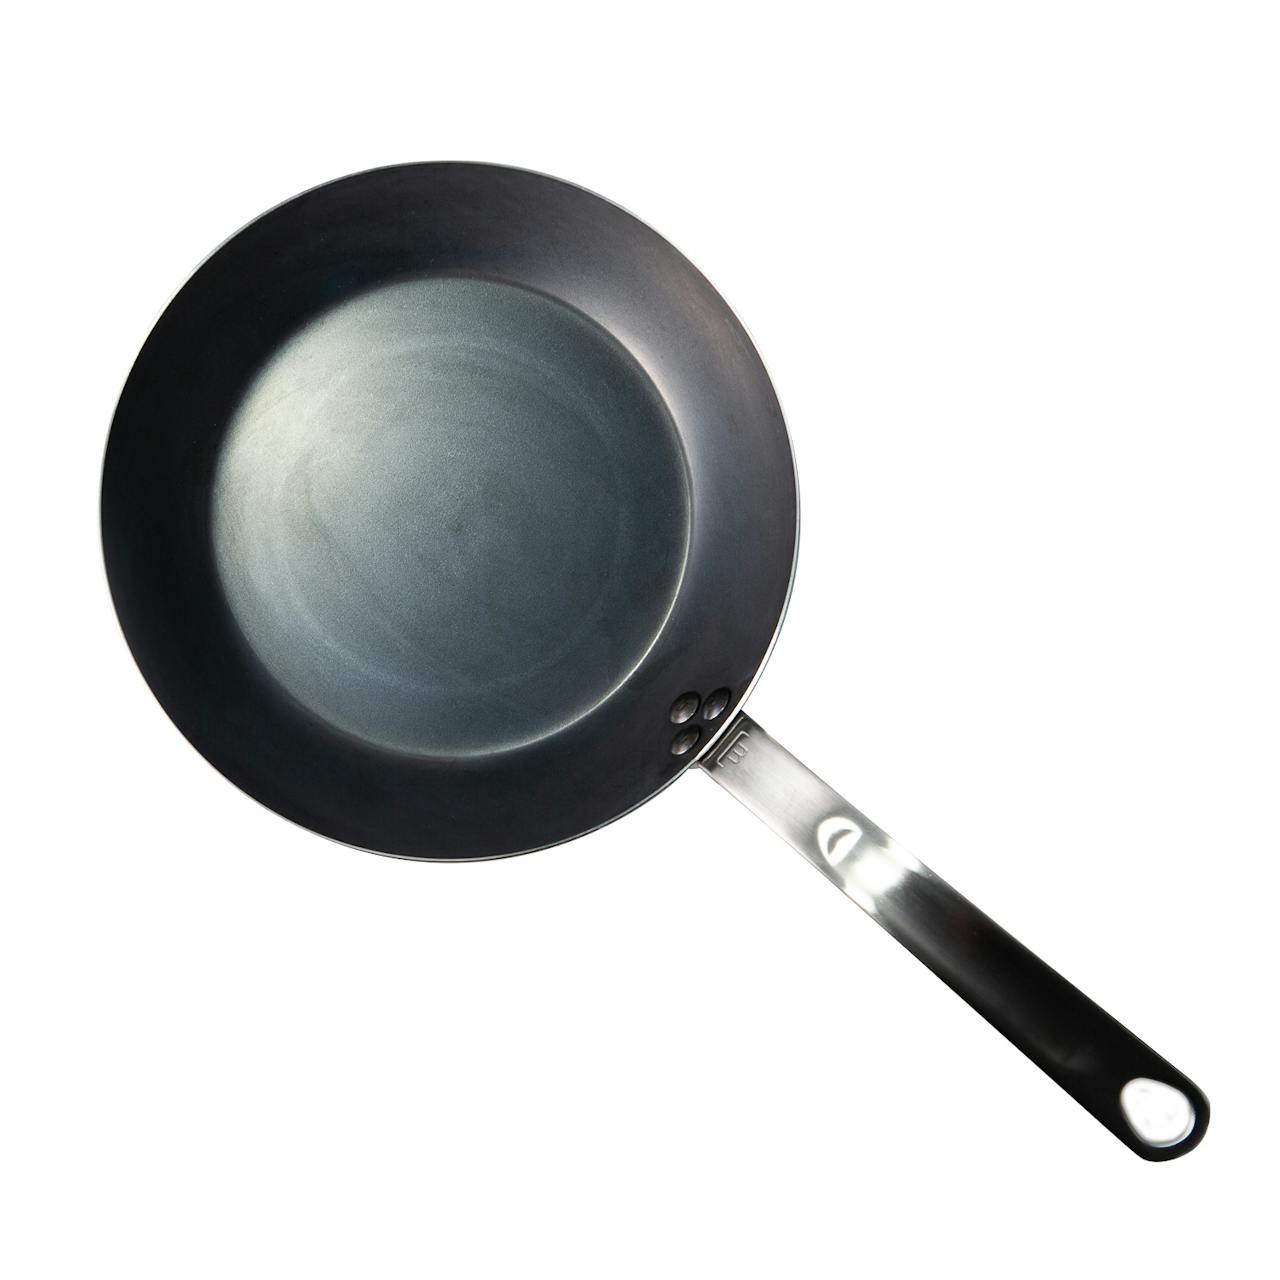 Made In Blue Carbon Steel Frying Pan Review